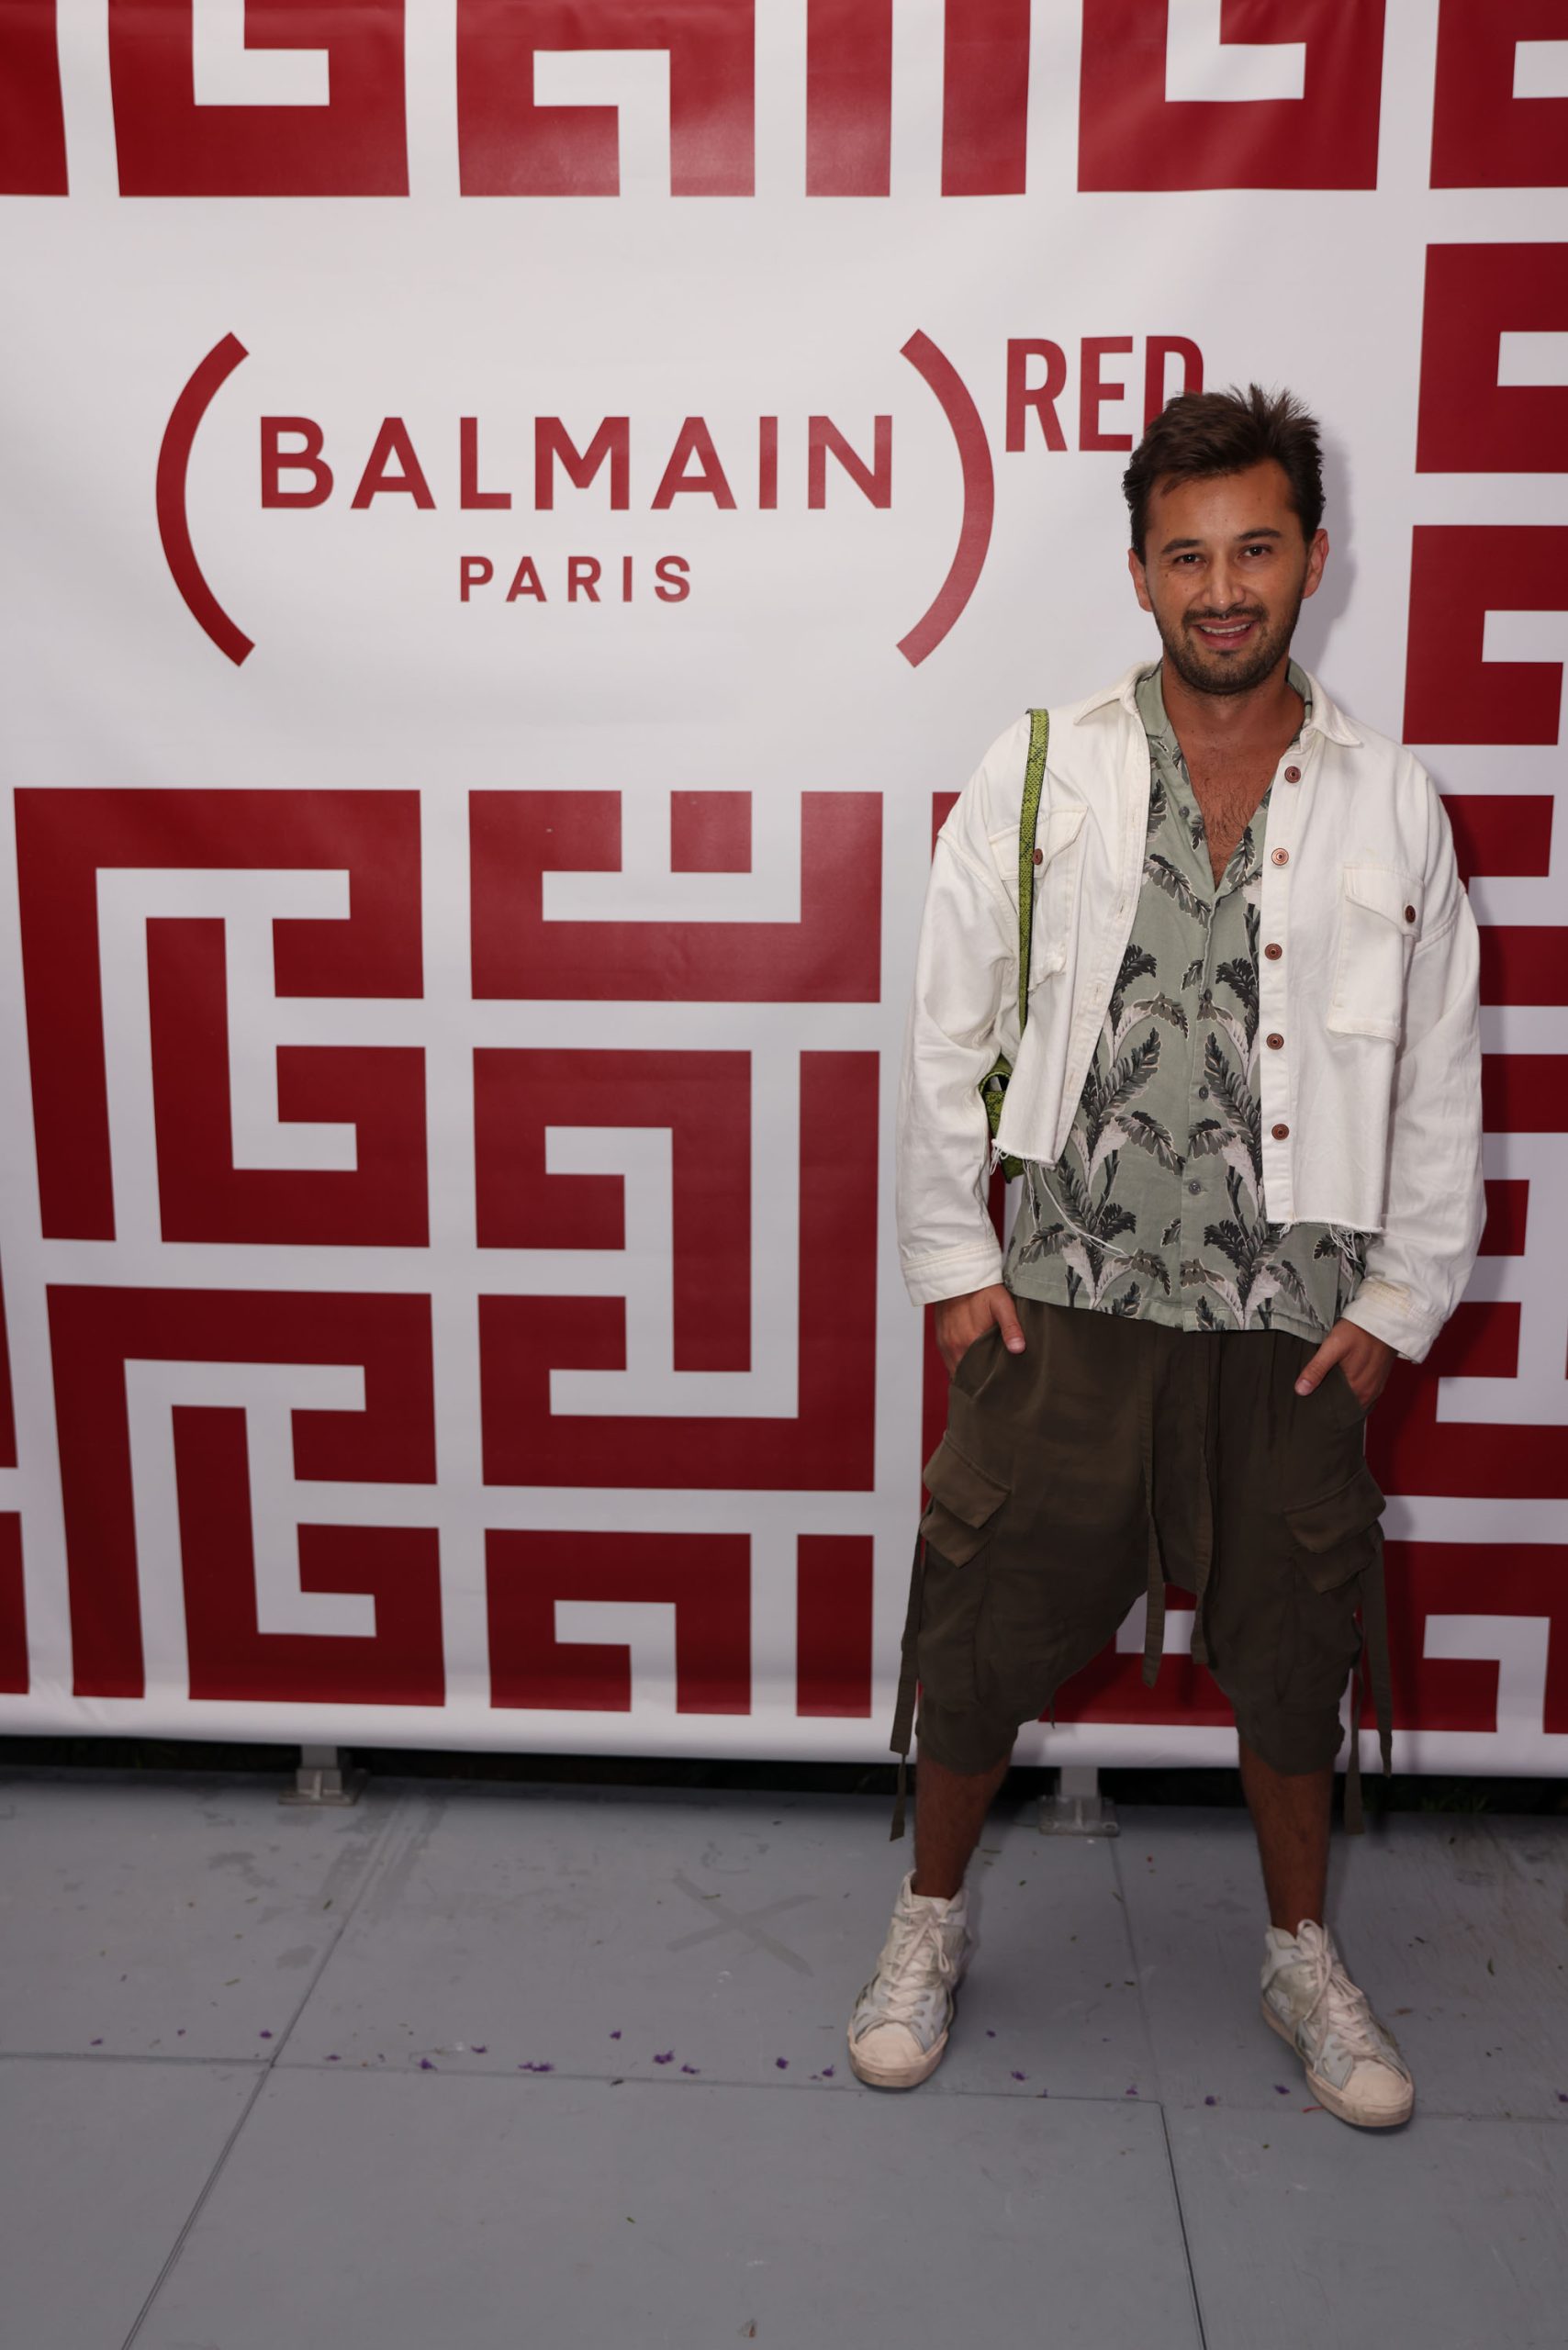 Balmain Joins with Red and Live Nation for a Special Miami Art Week Event